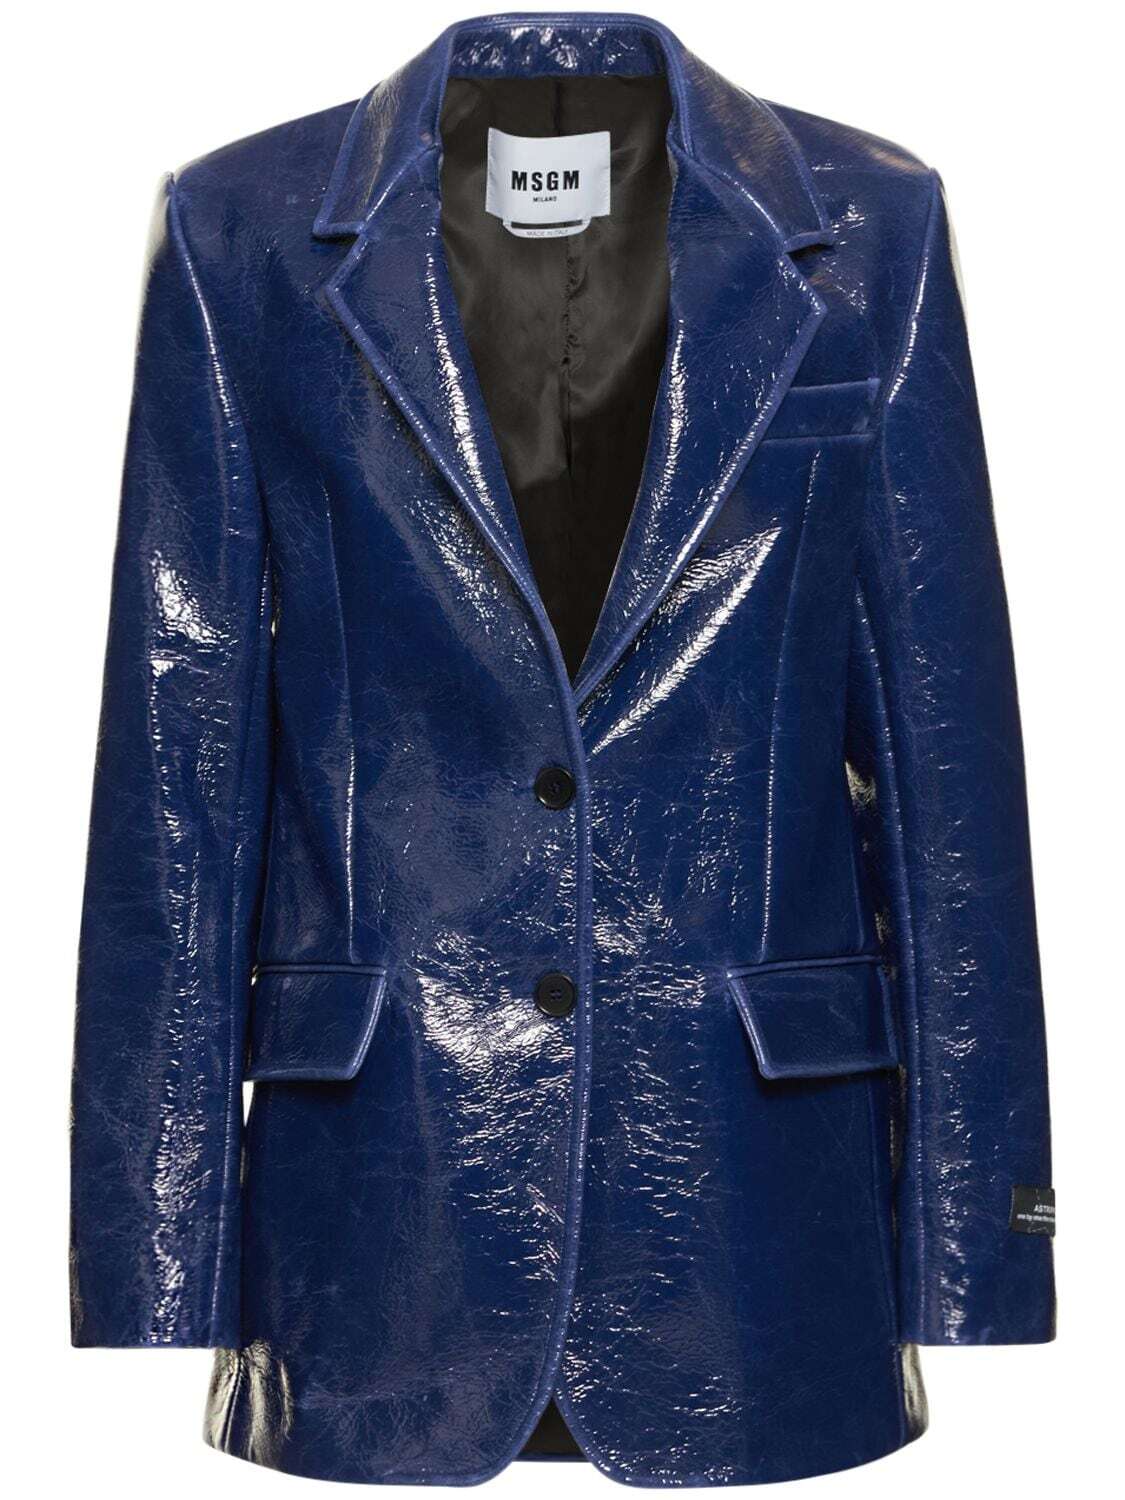 MSGM Faux Patent Leather Blazer Jacket in blue